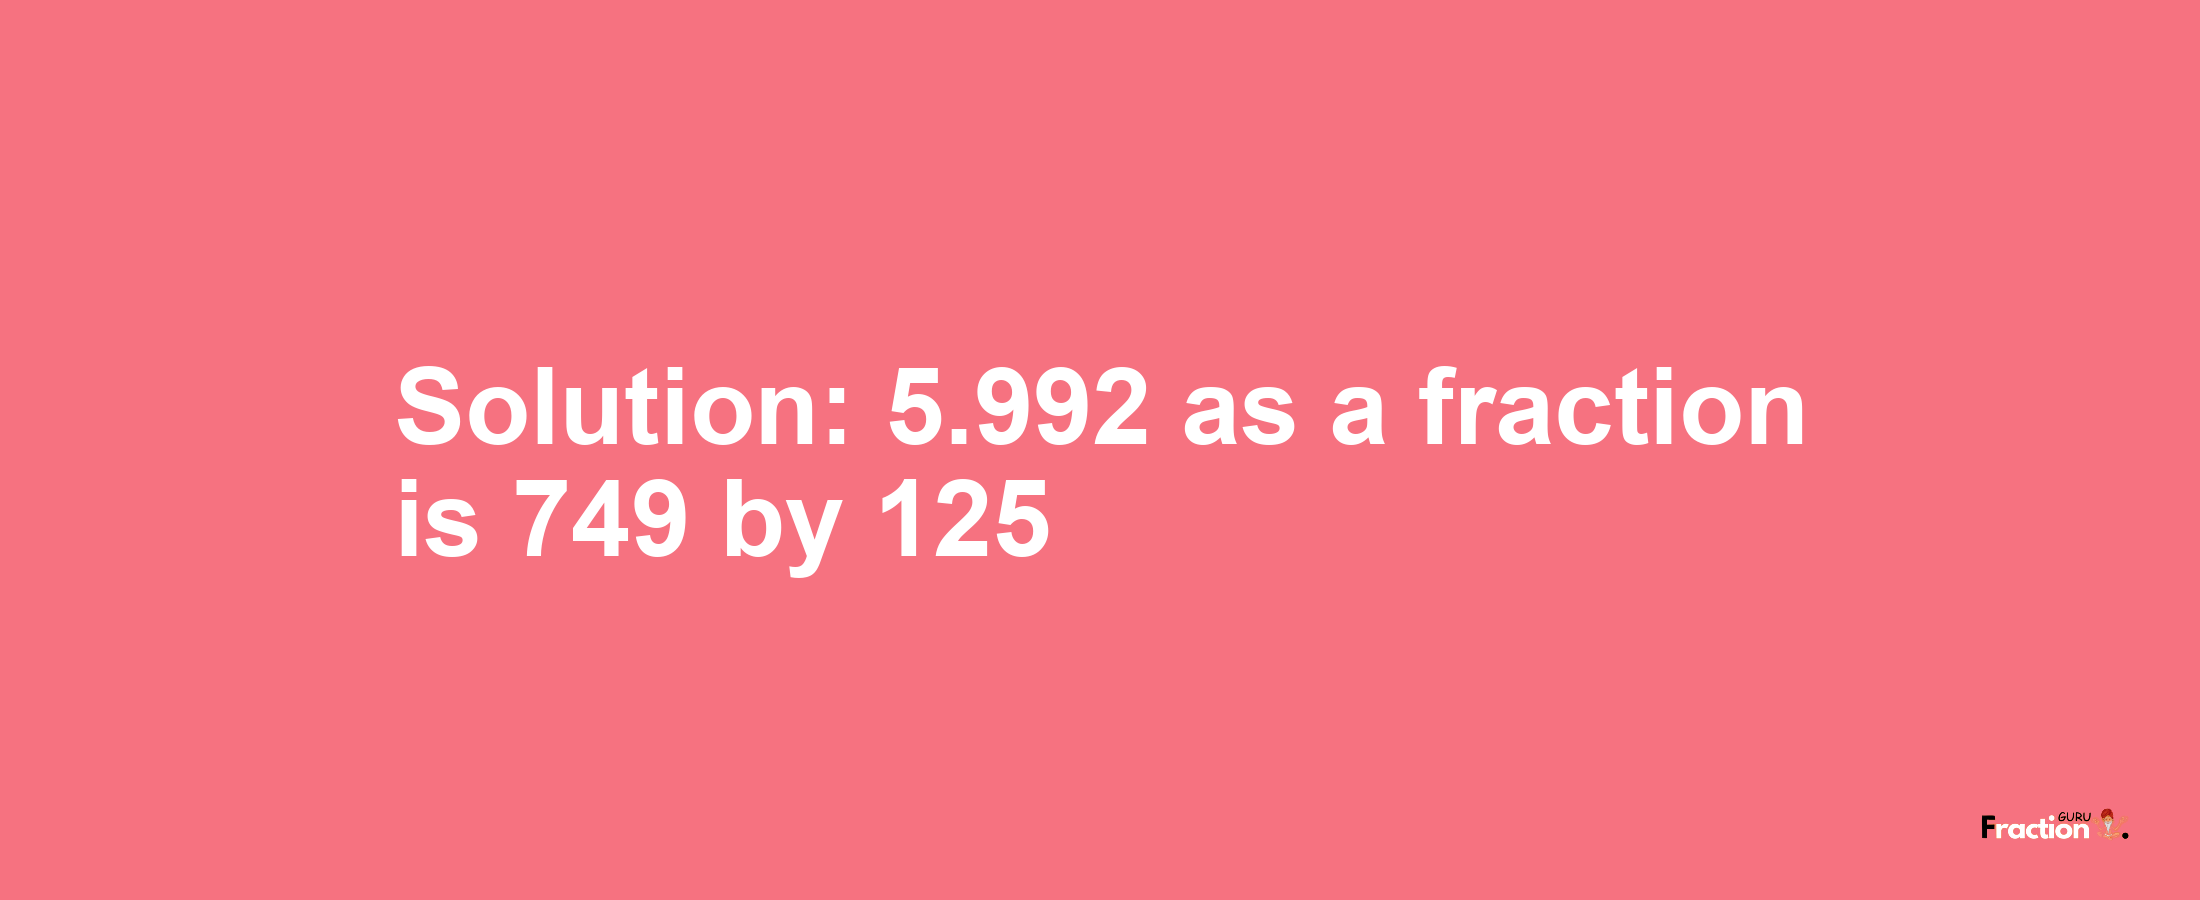 Solution:5.992 as a fraction is 749/125